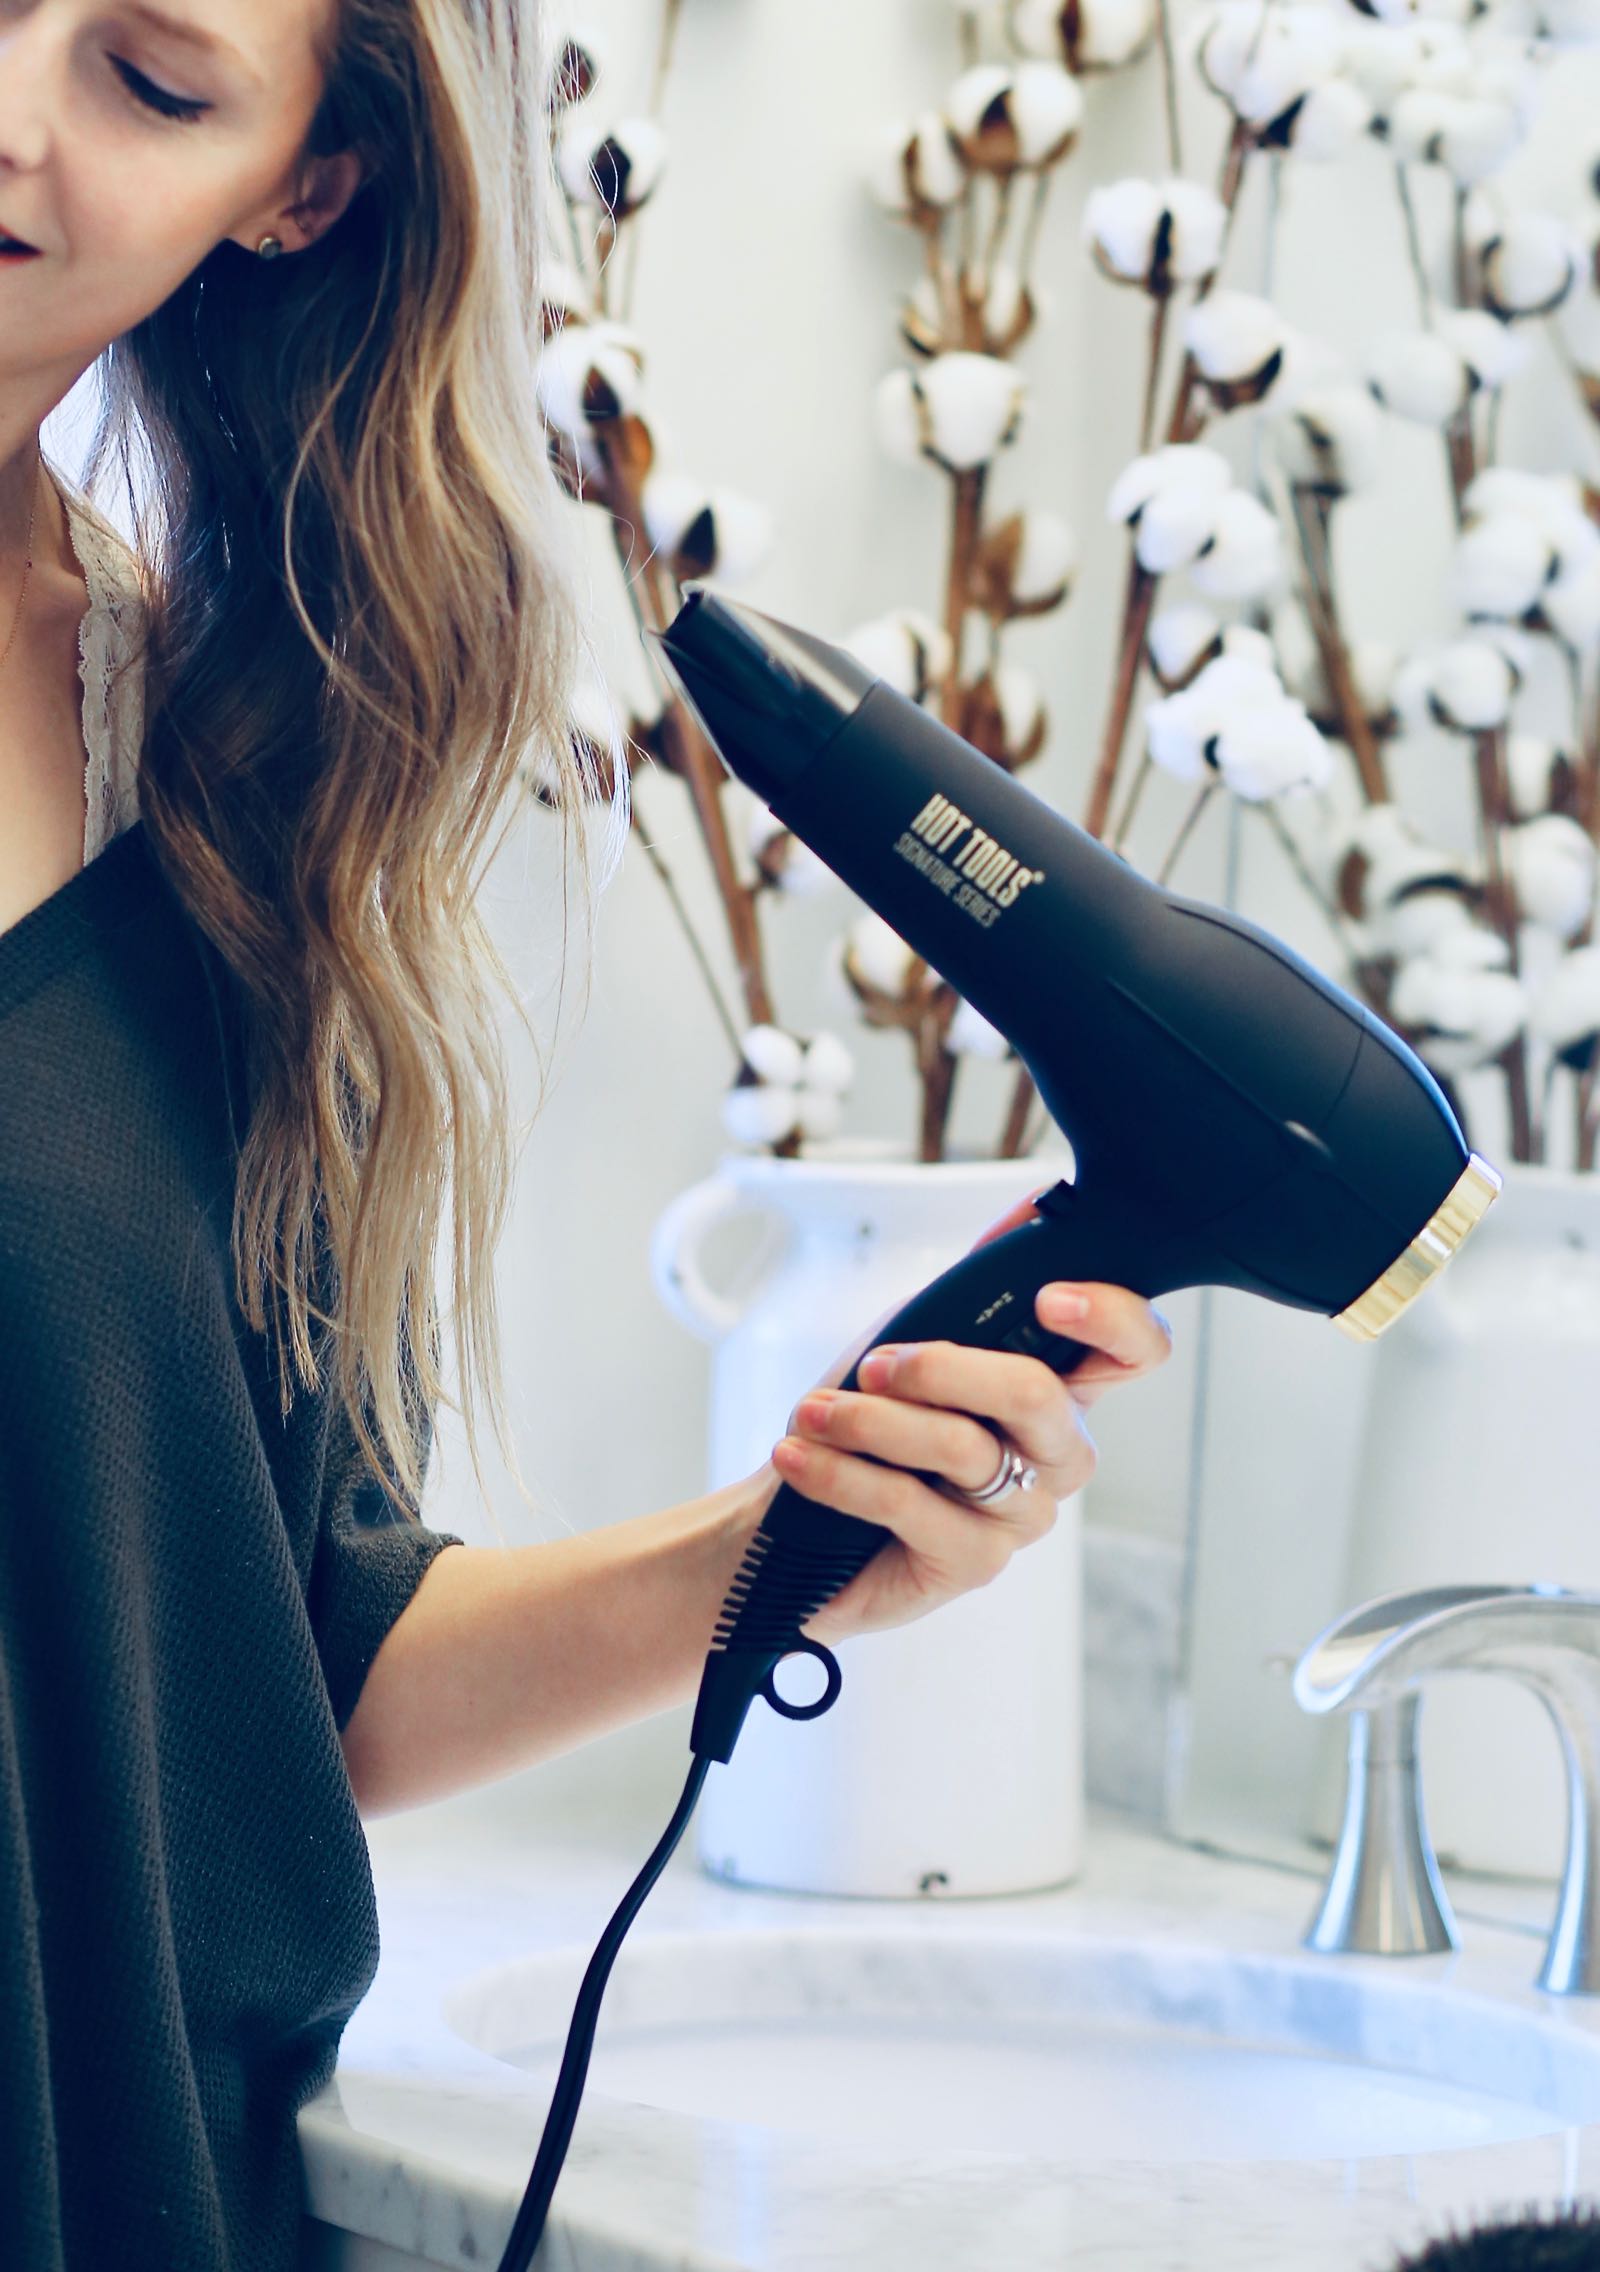 Hot Tools Signature Series blow dryer review - bookmarking this one!